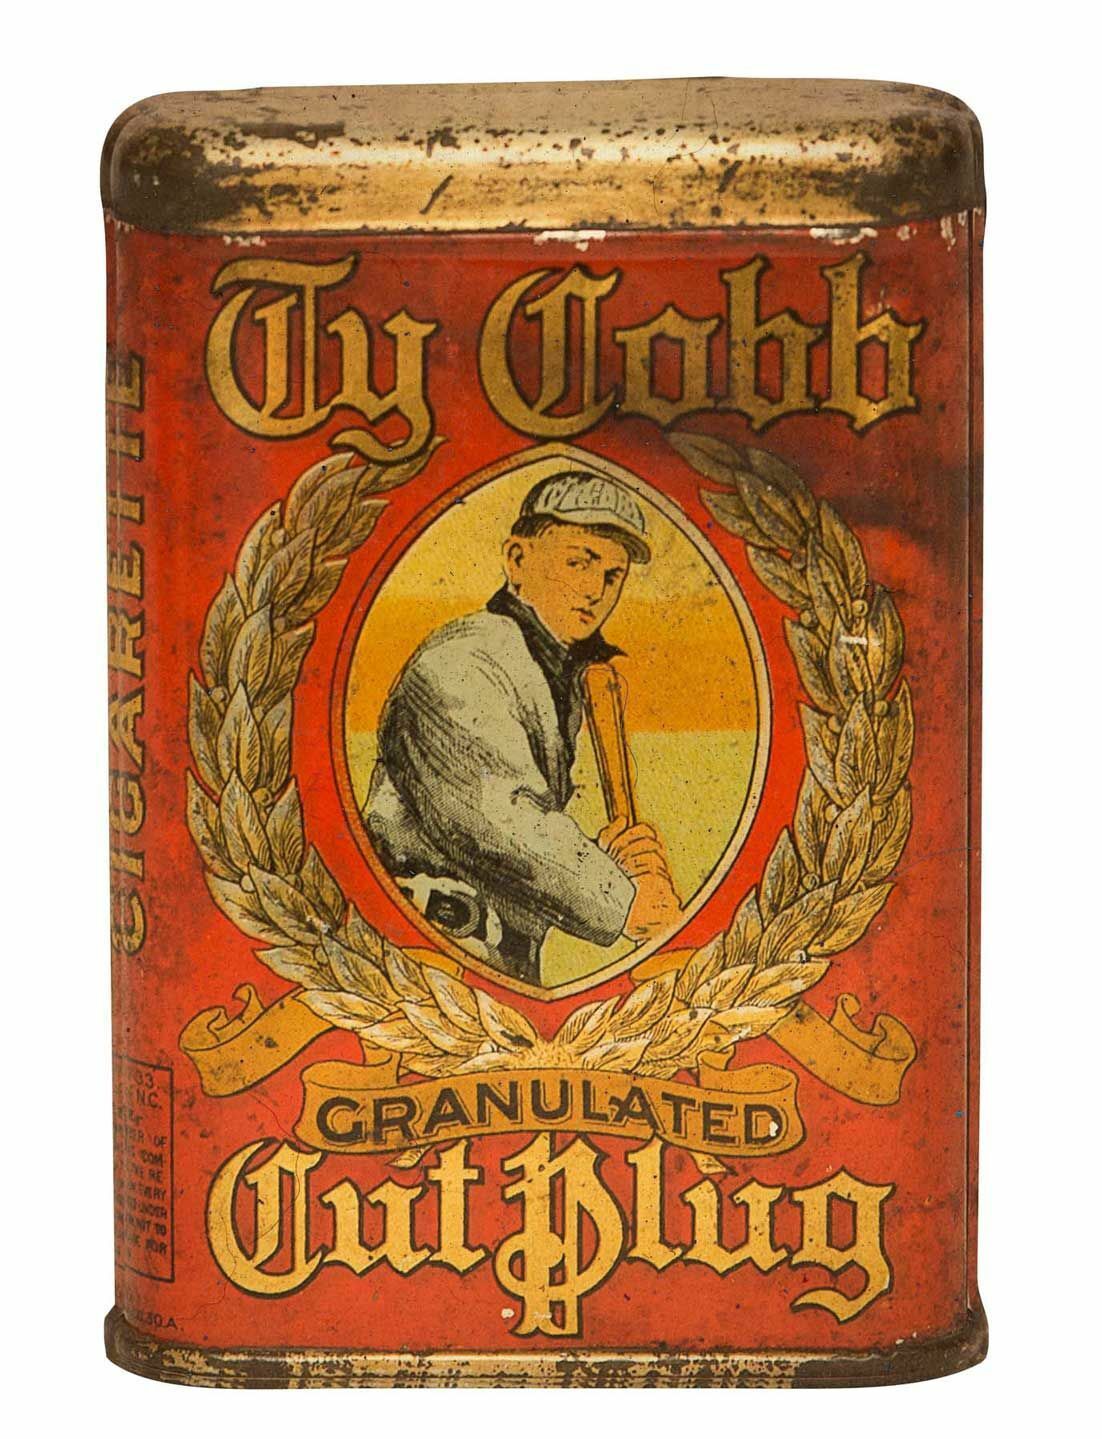 TY COBB GRANULATED CUT PLUG TOBACCO HEAVY DUTY USA MADE METAL ADVERTISING SIGN